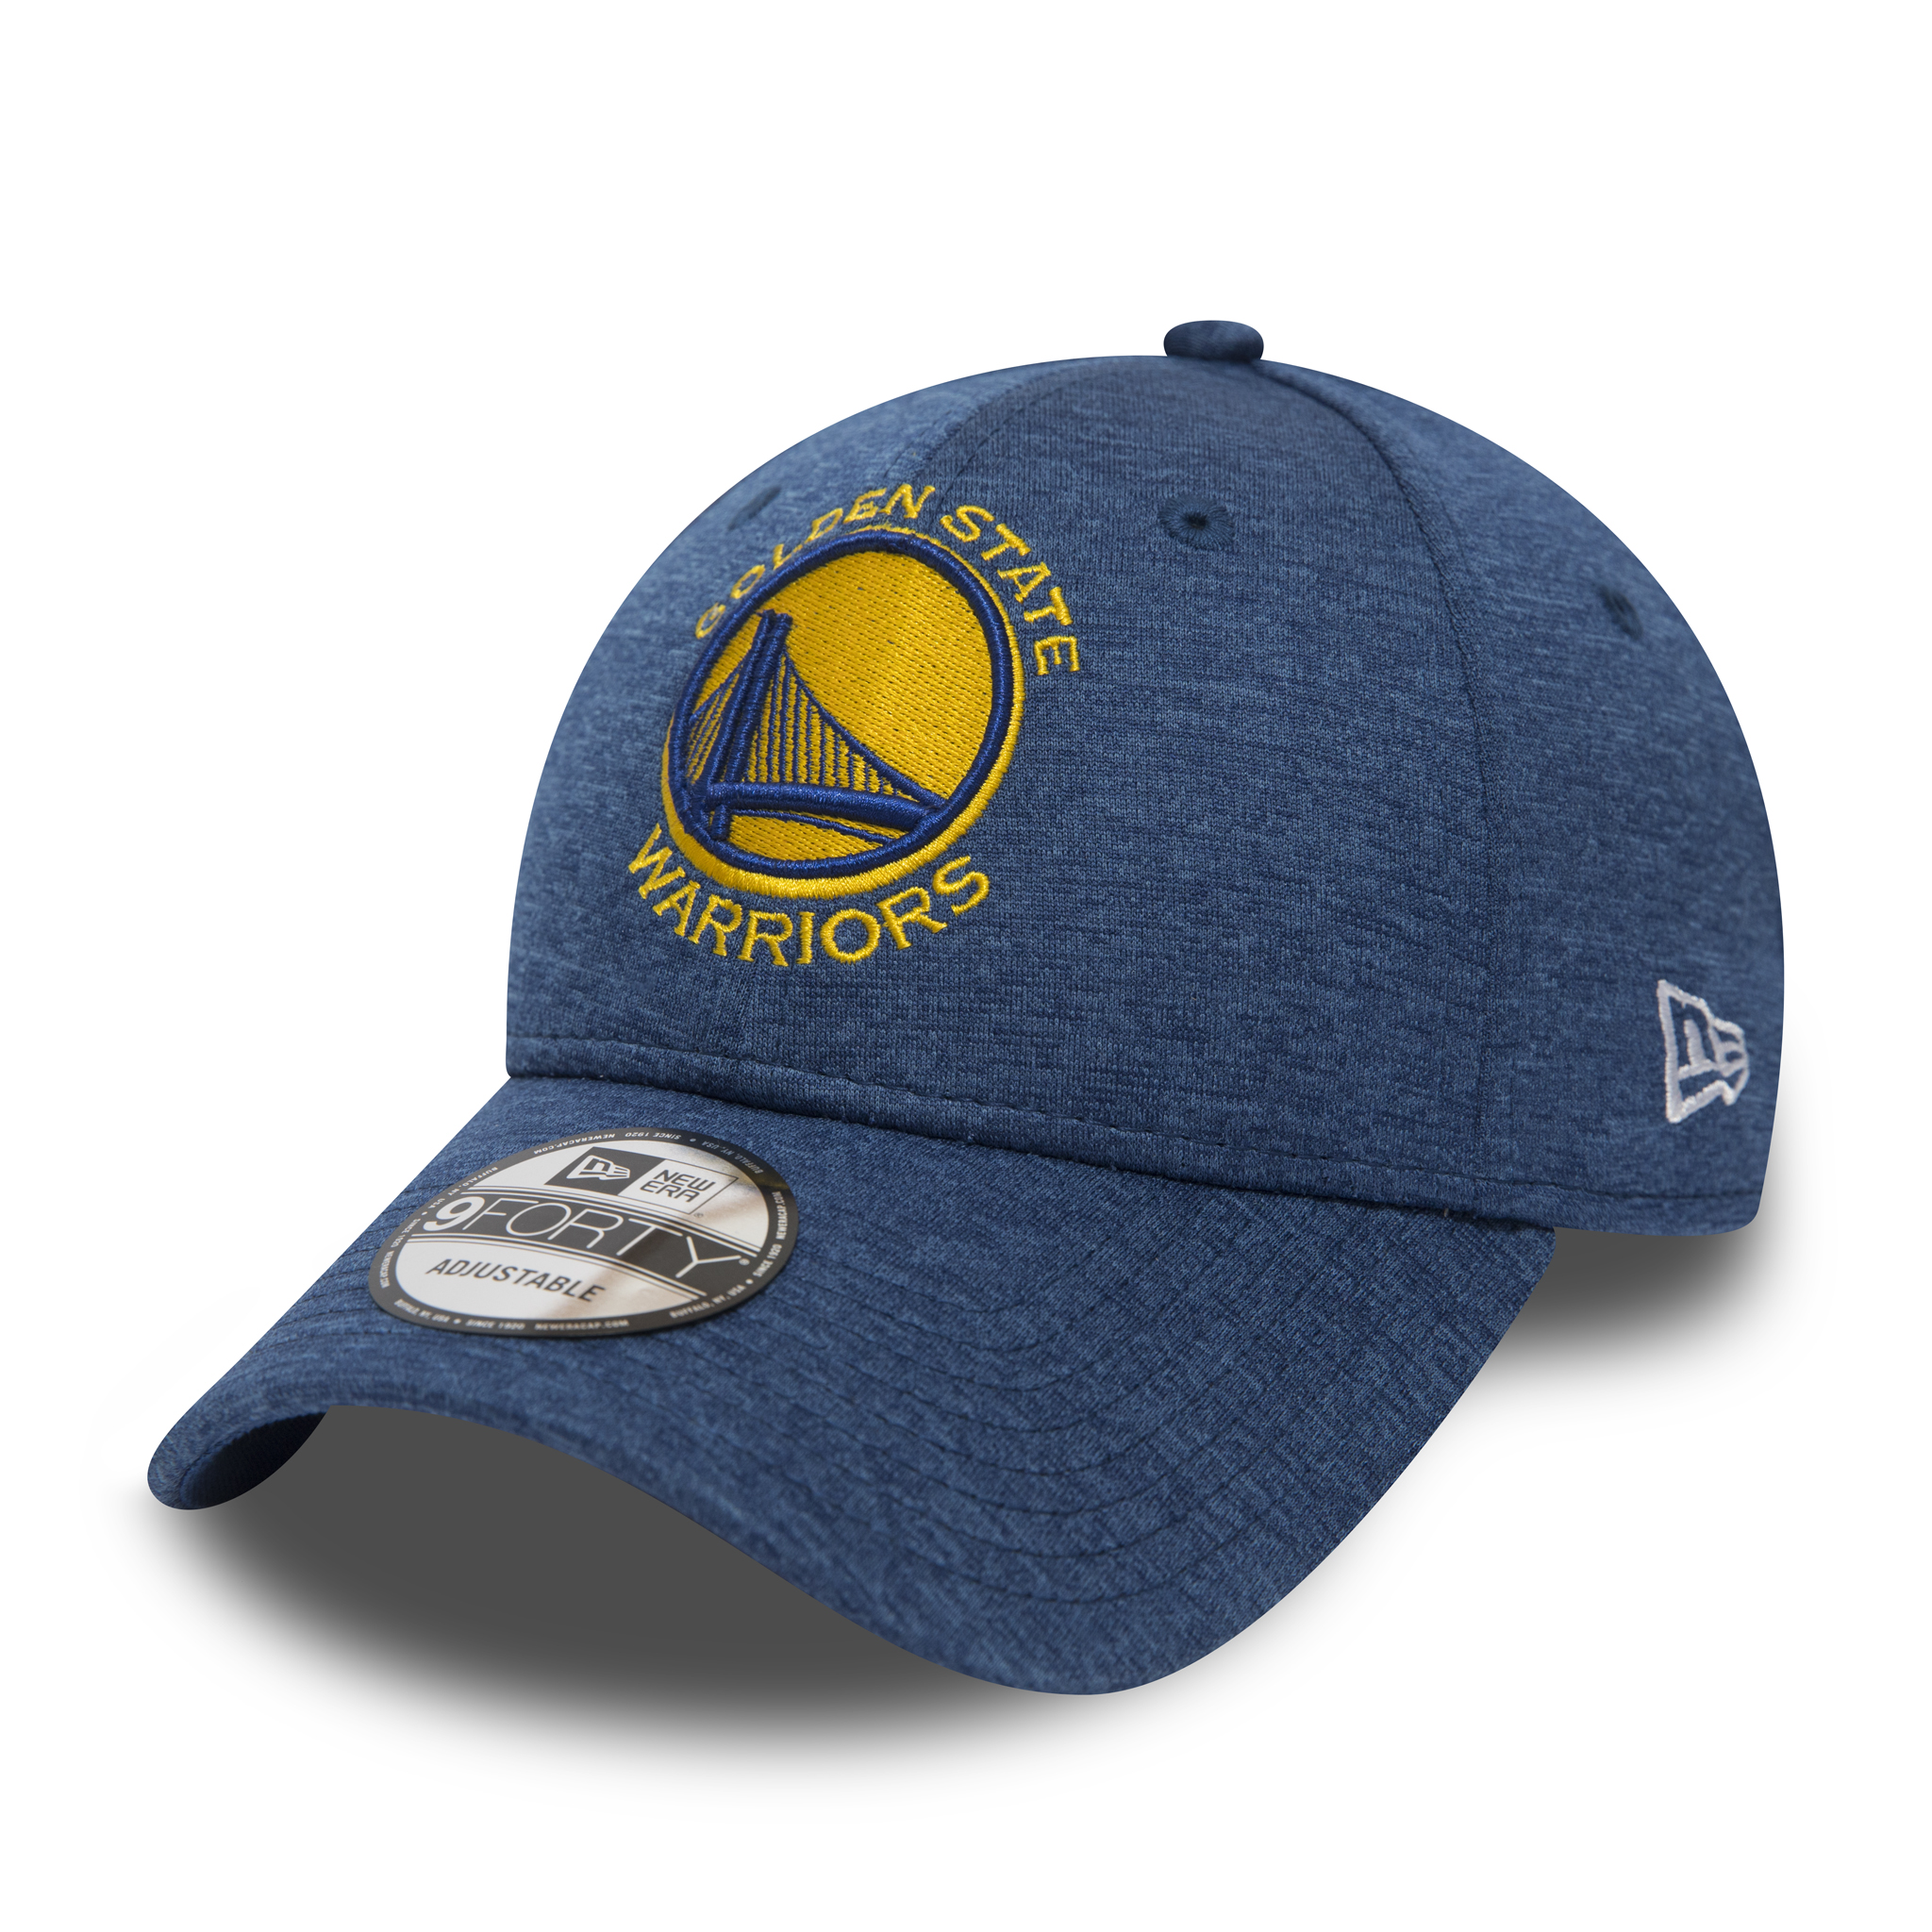 Golden State Warriors Jersey Blue 9FORTY Cap